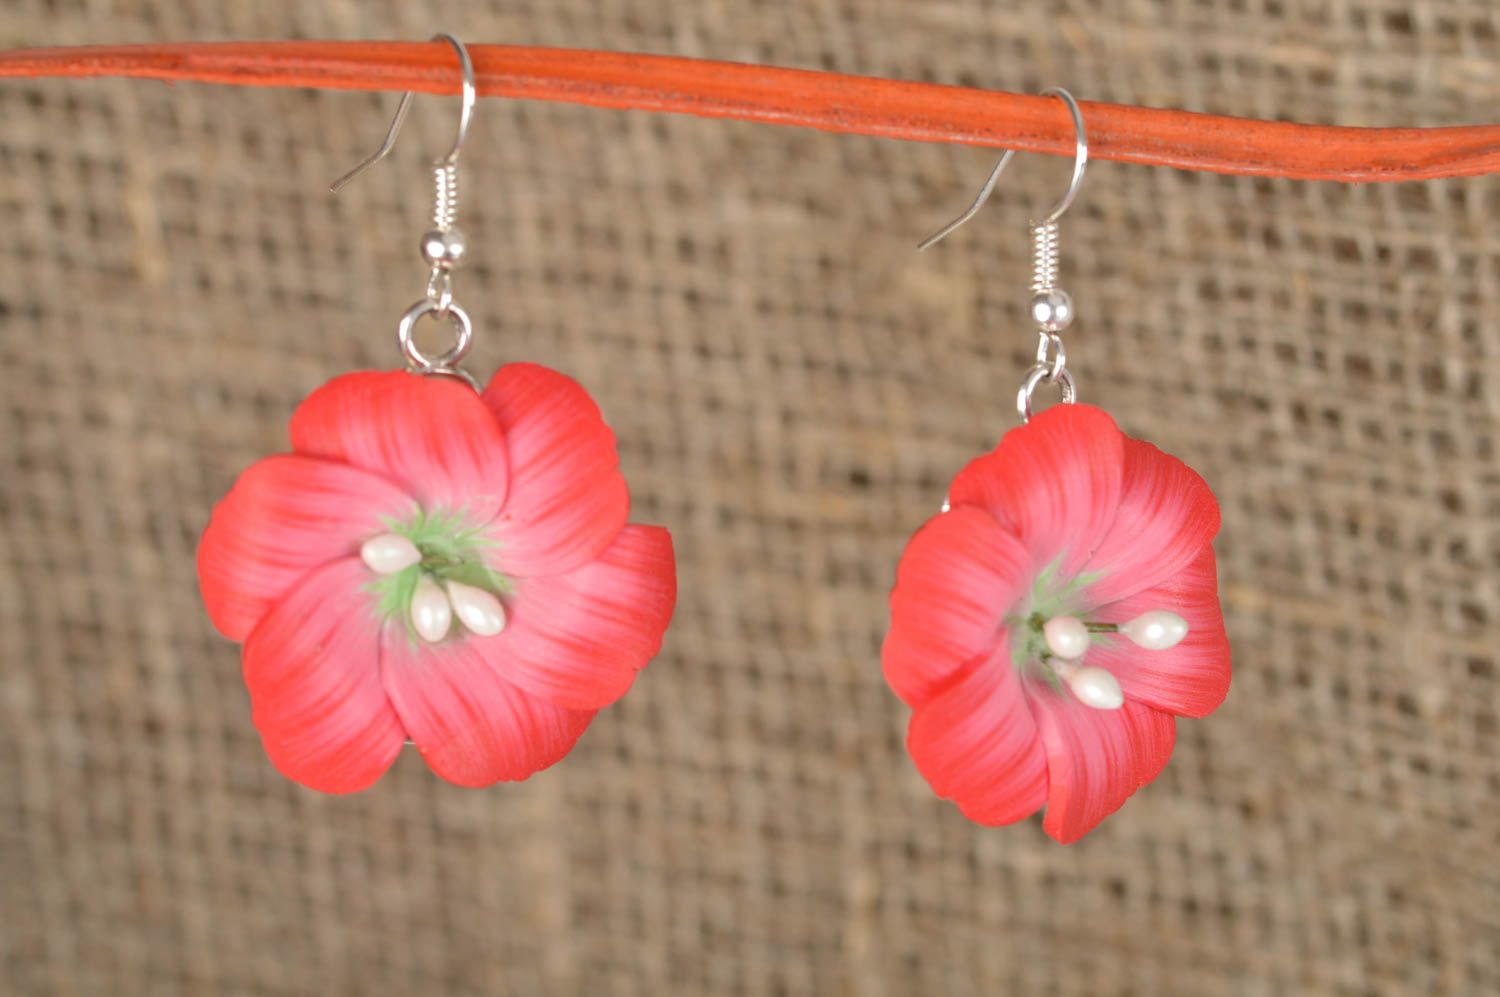 Handmade designer polymer clay earrings with red flowers summer jewelry photo 1